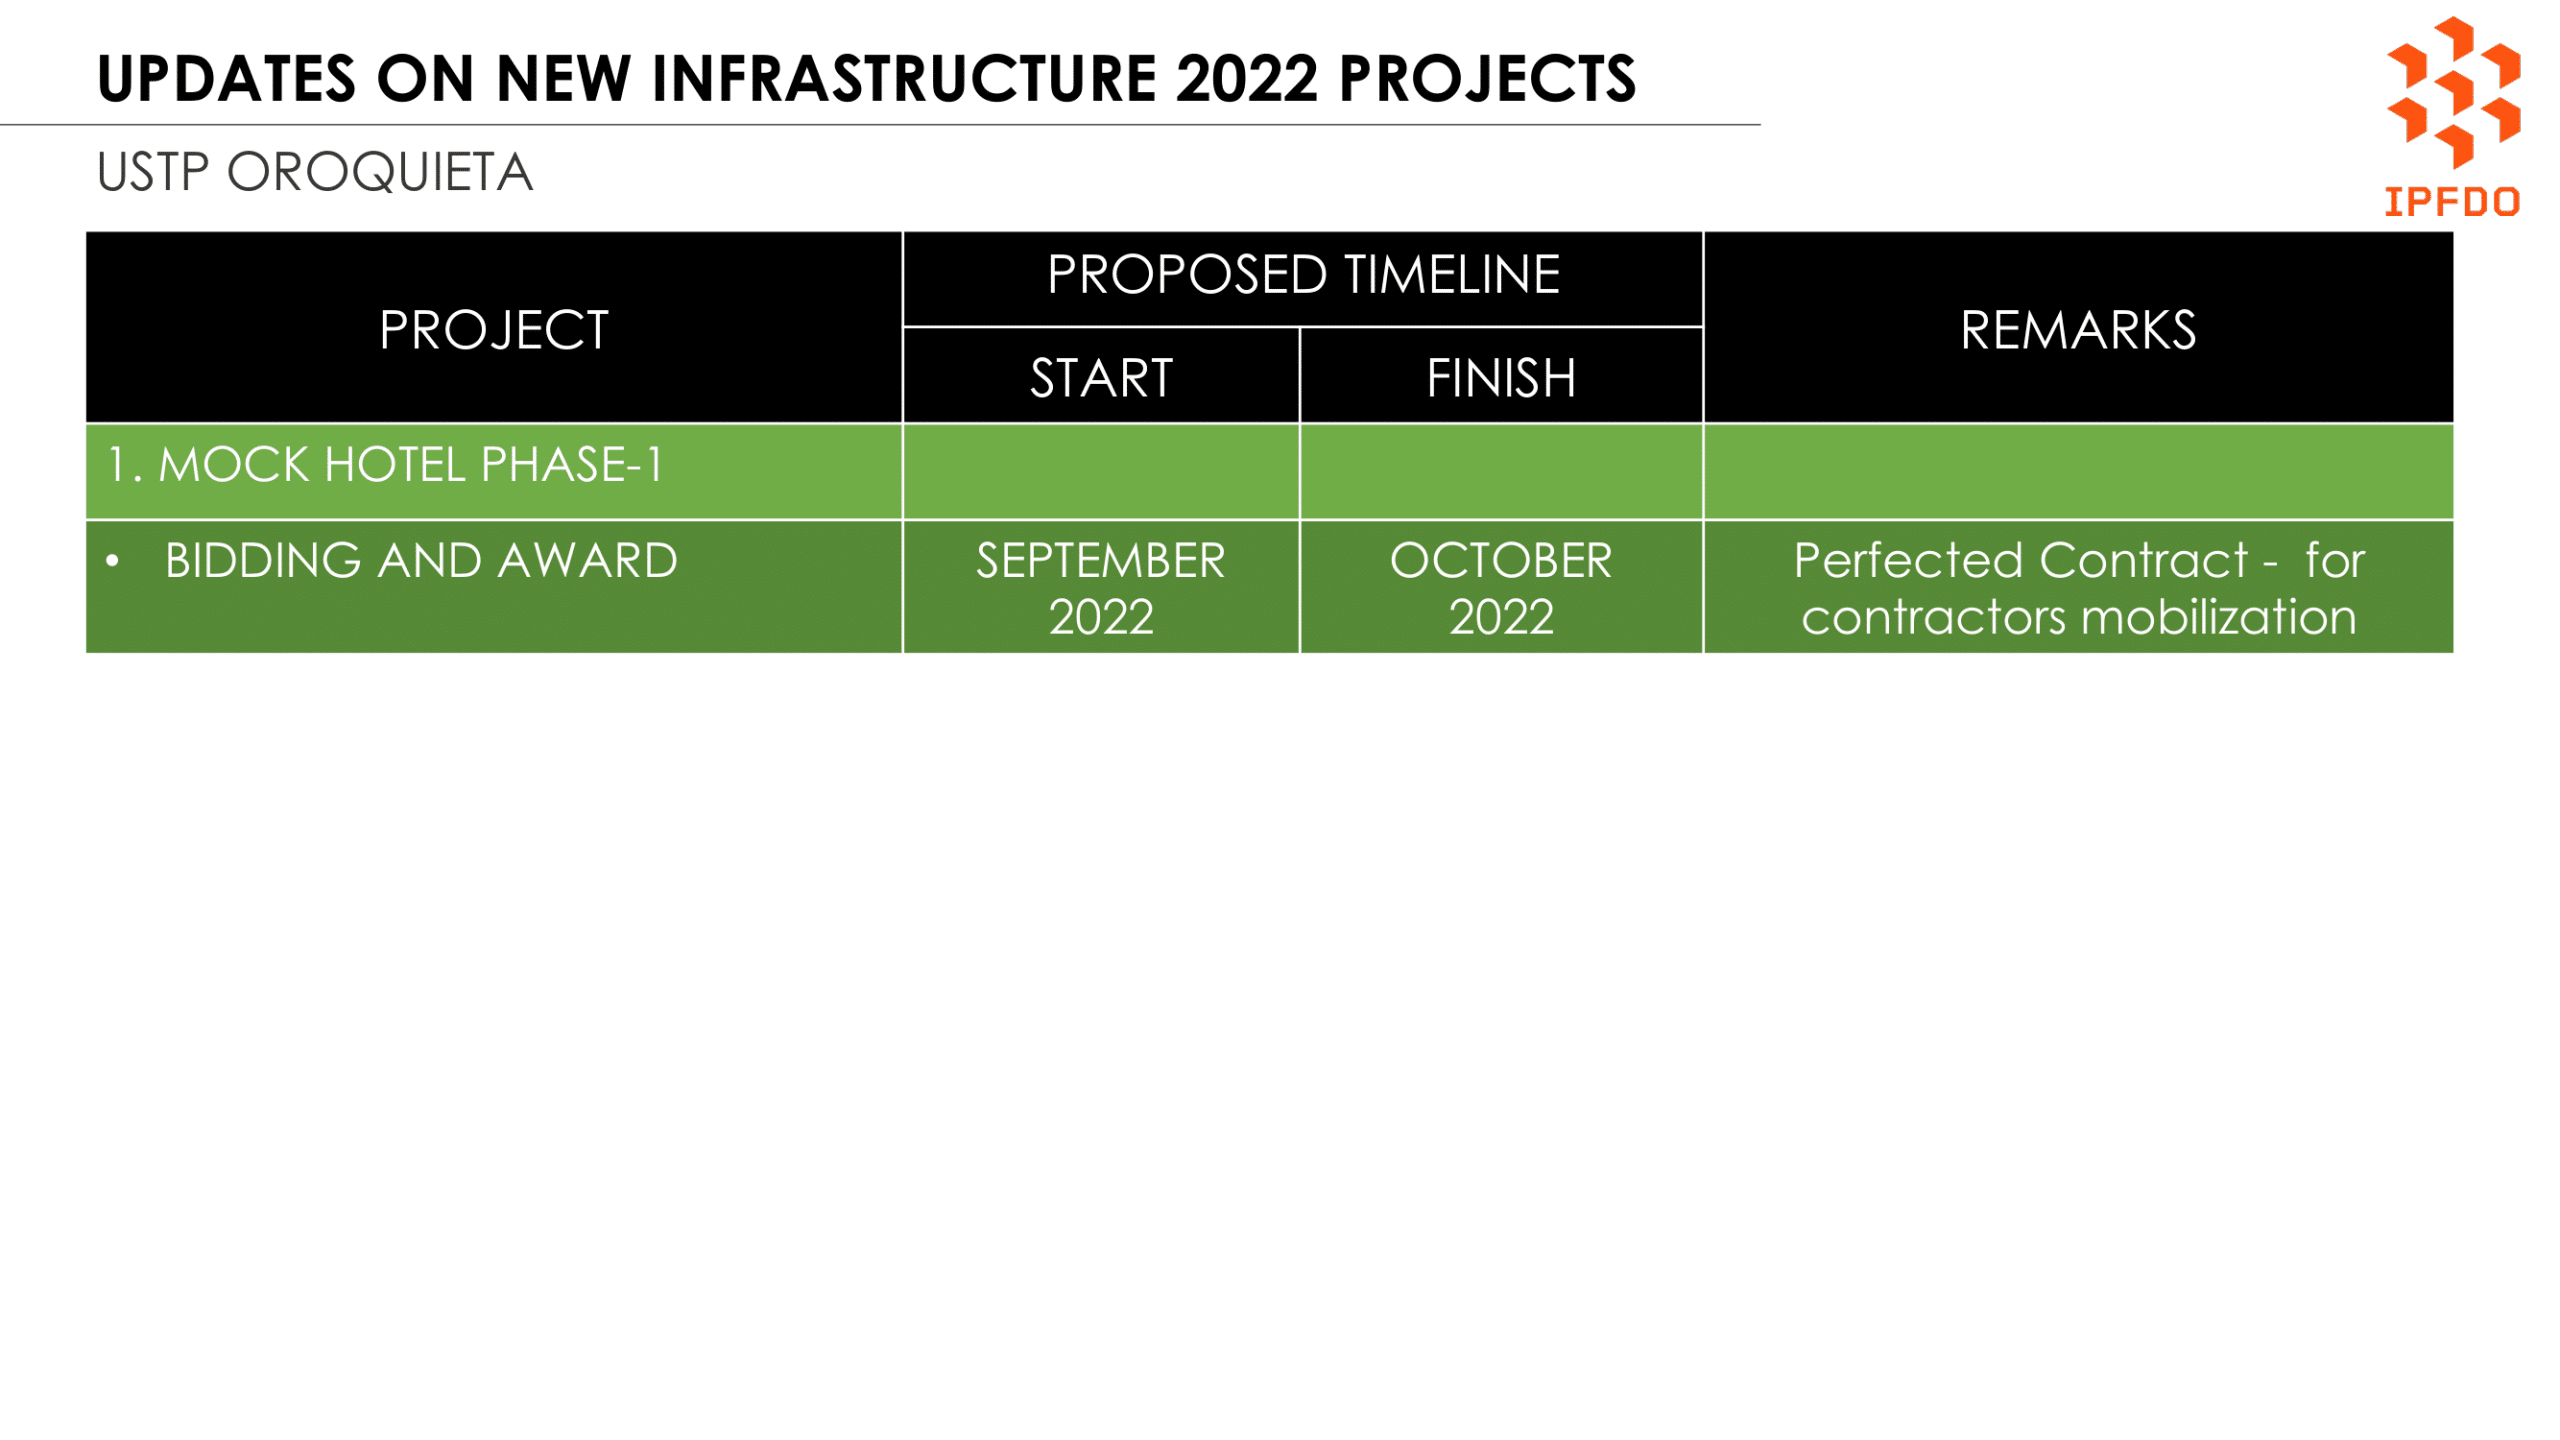 Updates on New Infrastructure 2022 Projects - USTP Oroquieta